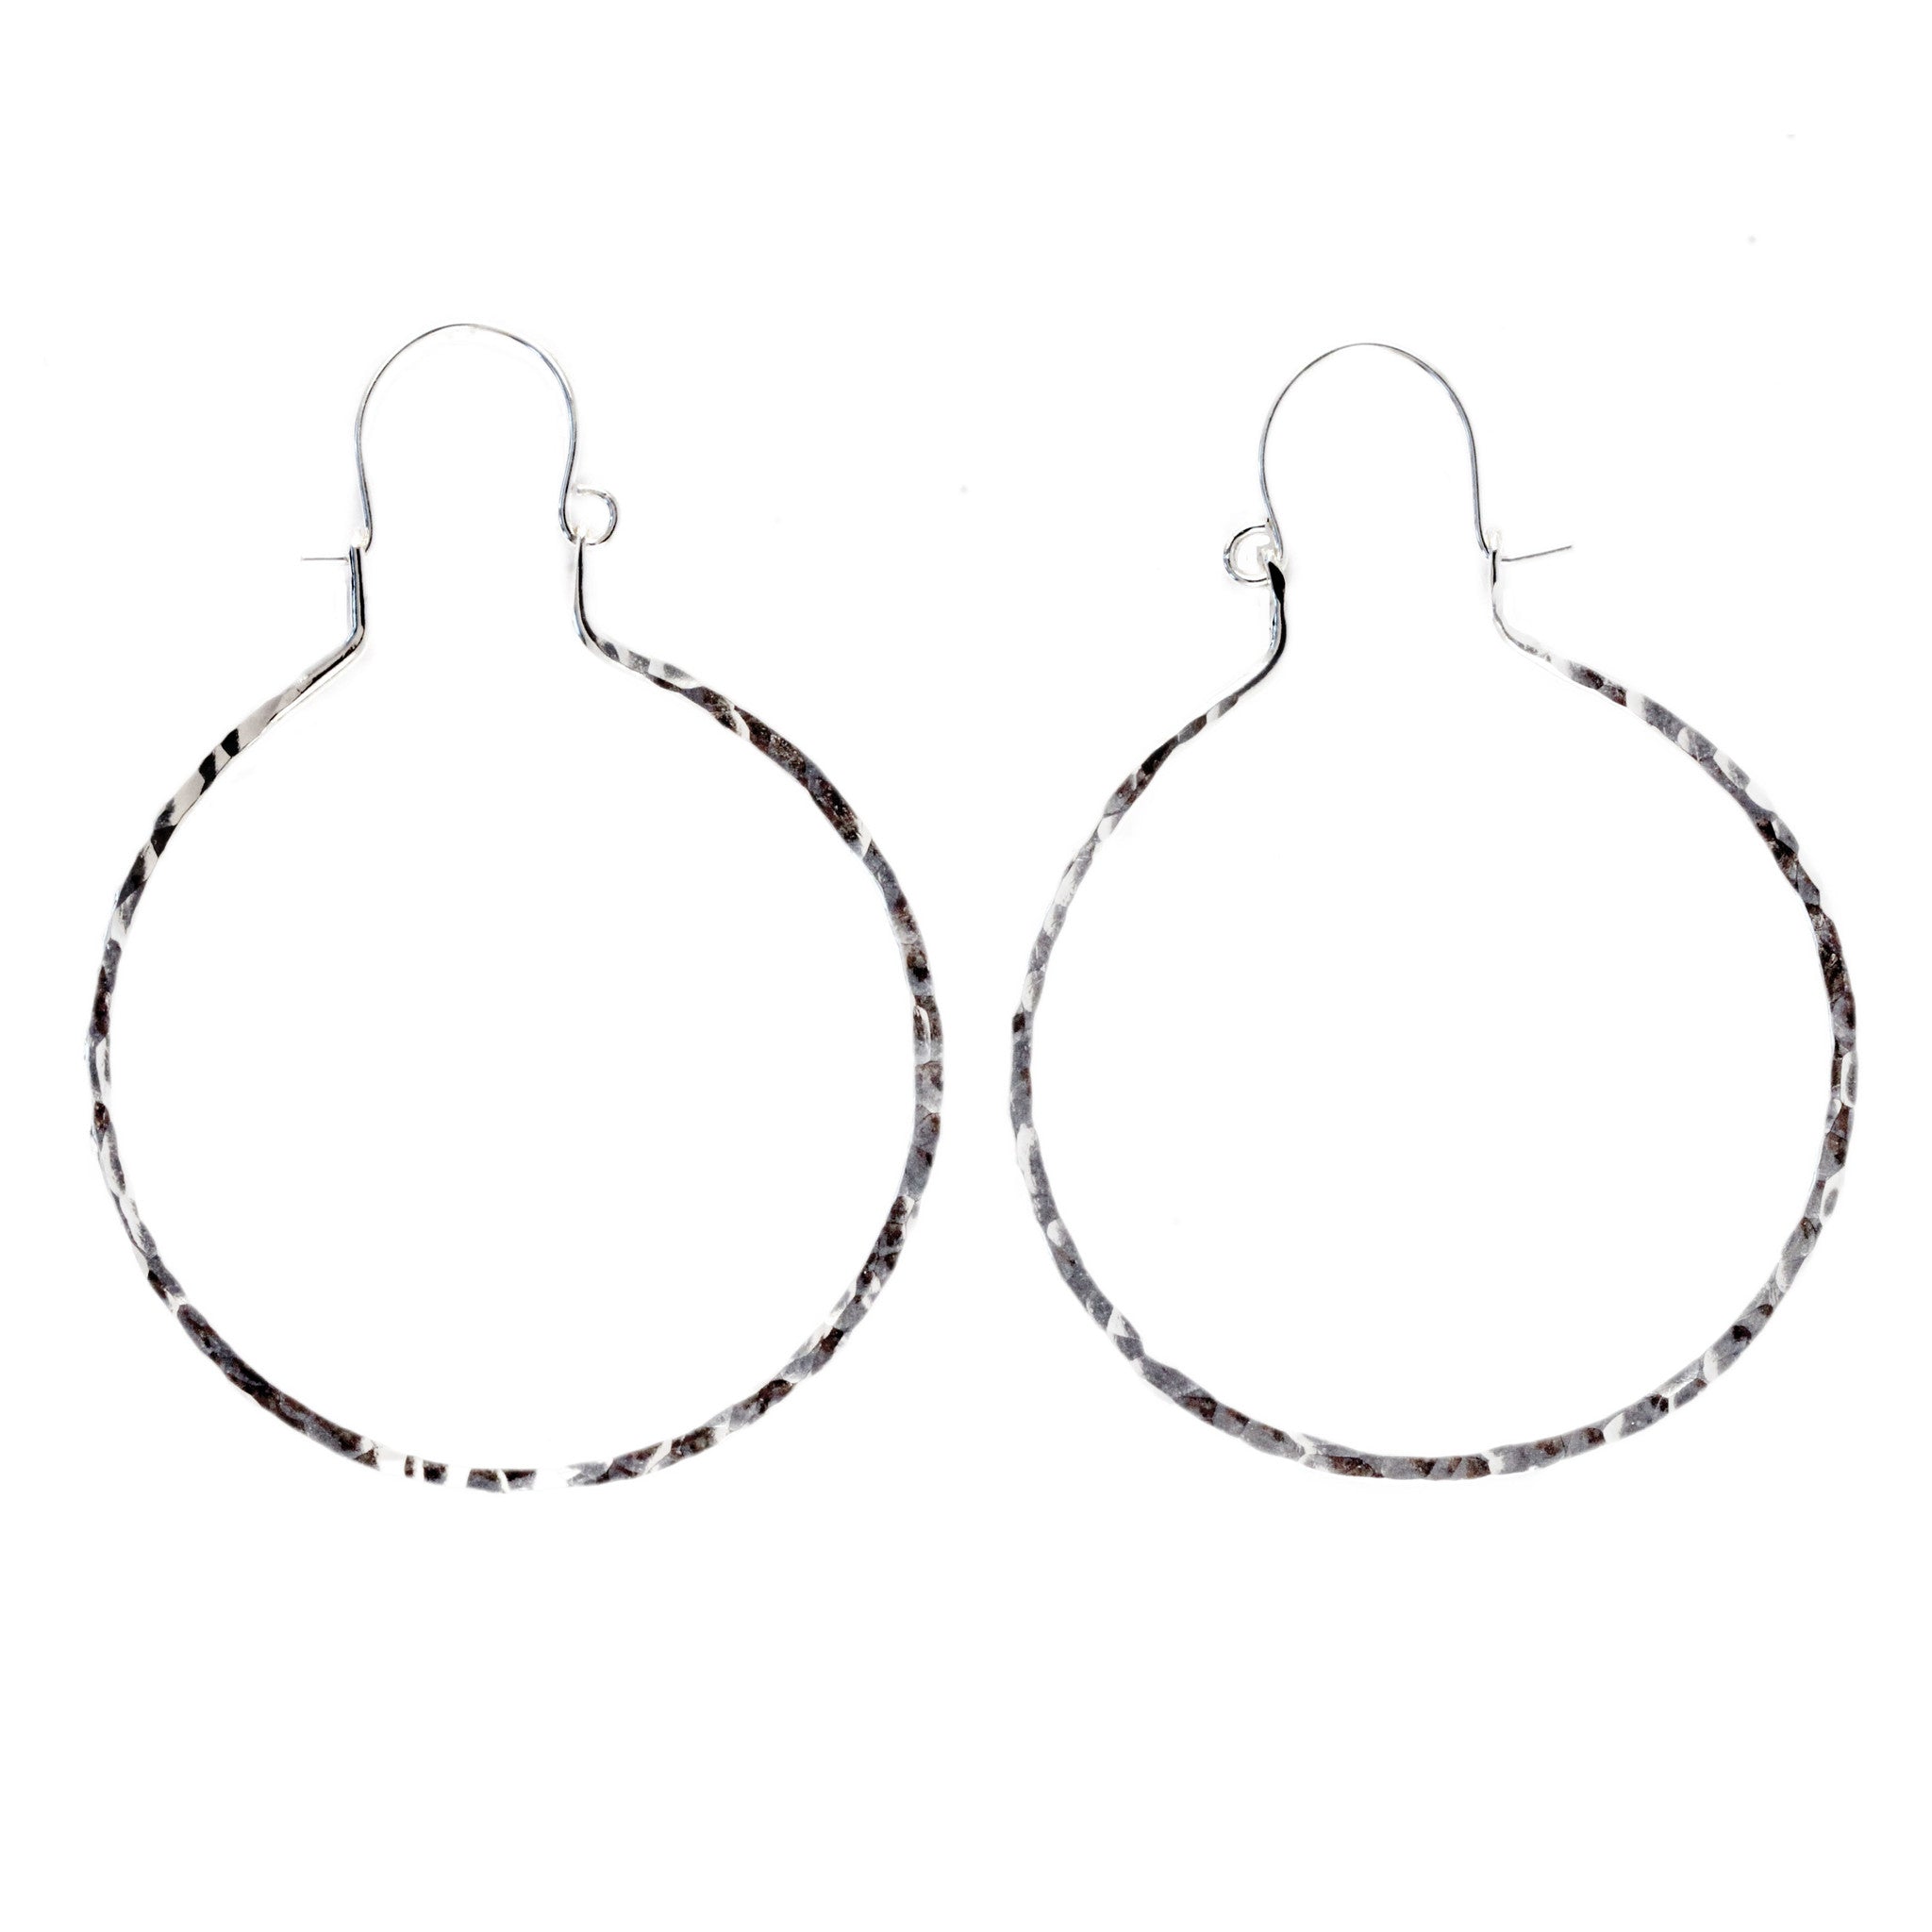 Hammered Hoop Earrings – Aquarian Thoughts Jewelry